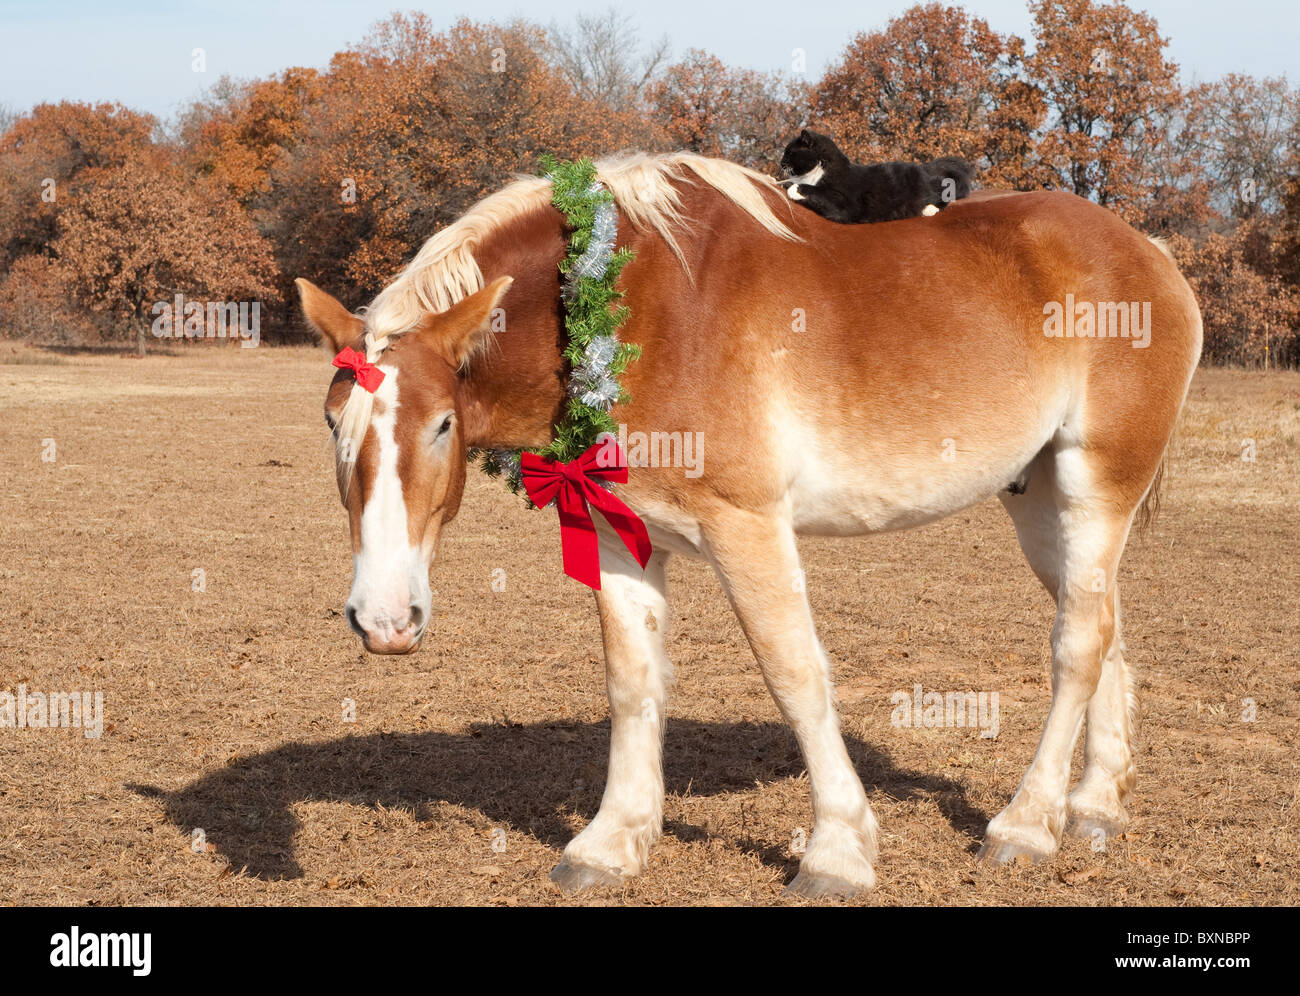 Cute image of a huge Belgian Draft horse wearing a Christmas wreath and a bow in his forelock, his little kitty cat friend ridin Stock Photo